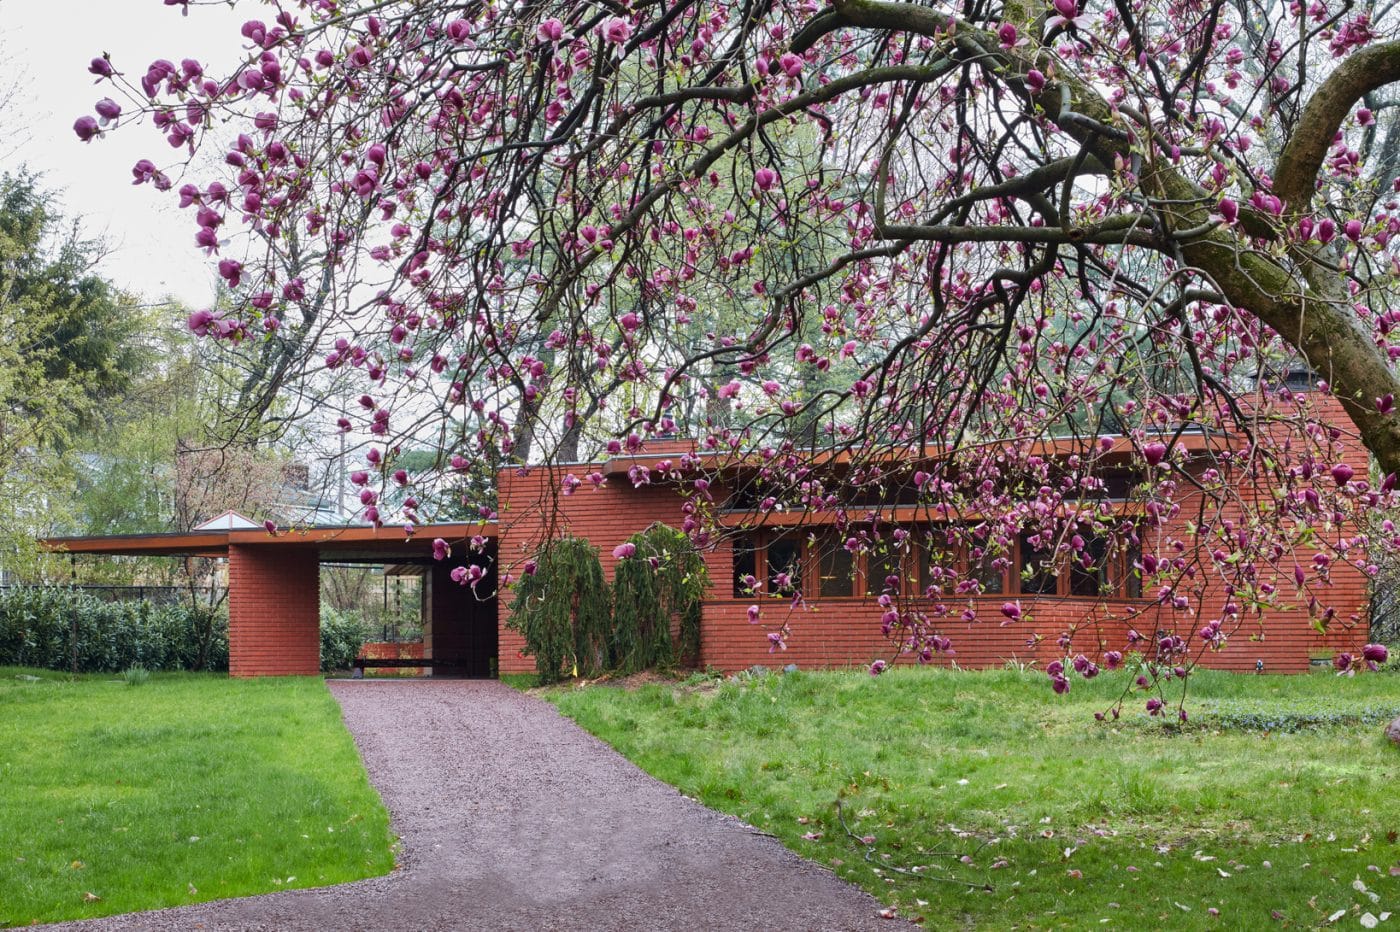 The red-brick exterior of Todd Levin's Frank Lloyd Wight Usonian home, Stuart Richardson House (1941)